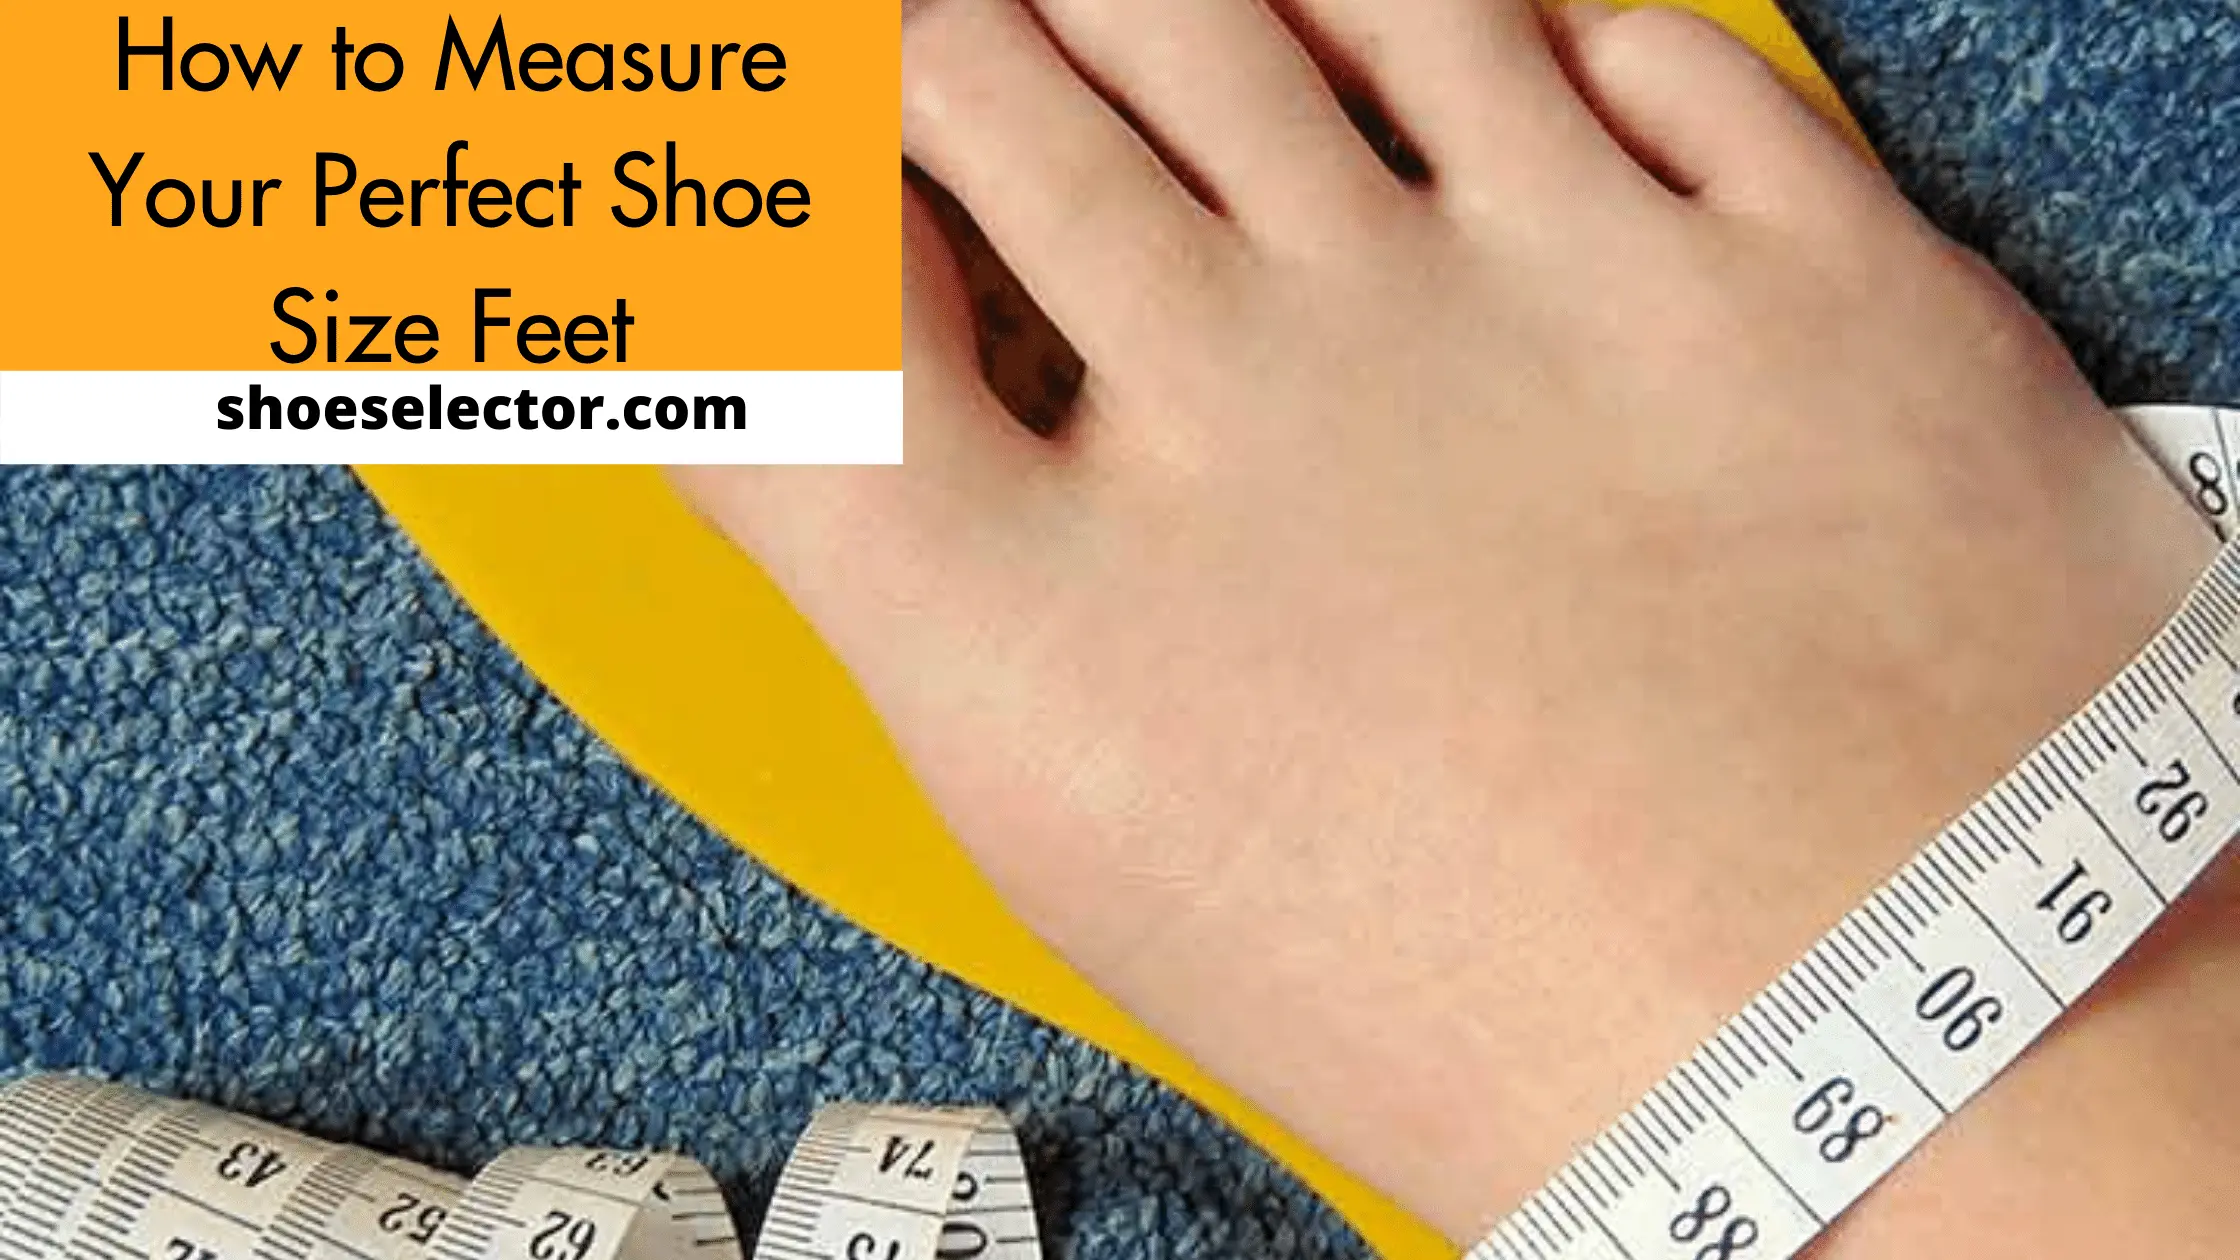 How to Measure Your Perfect Shoe Size Feet?